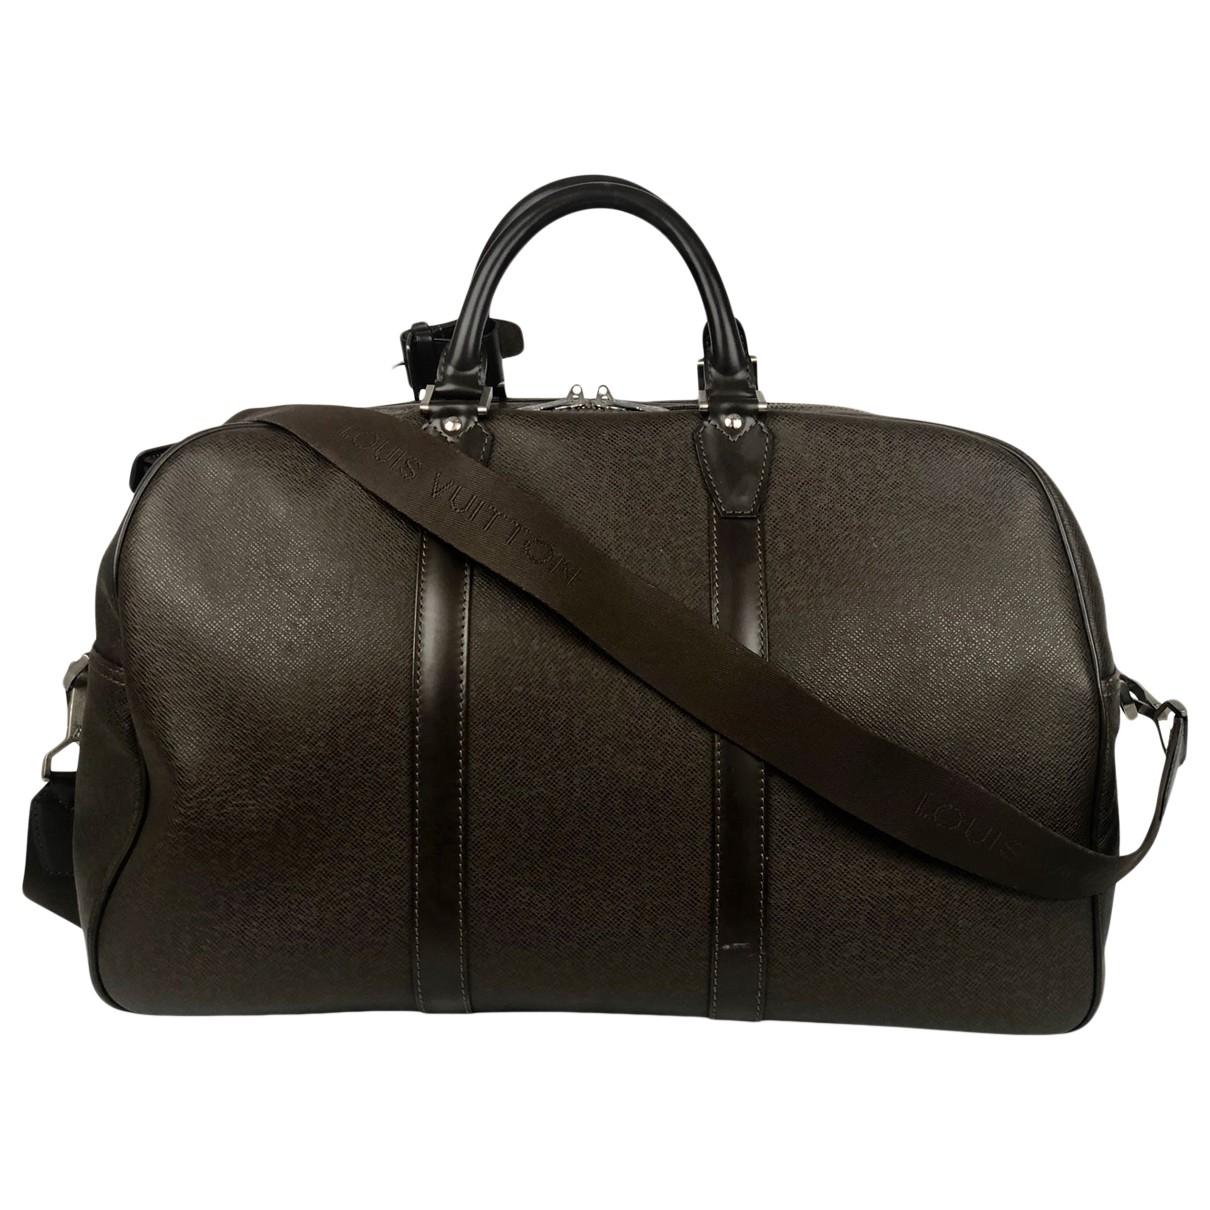 Lyst - Louis Vuitton Kendall Brown Leather Bag in Brown for Men